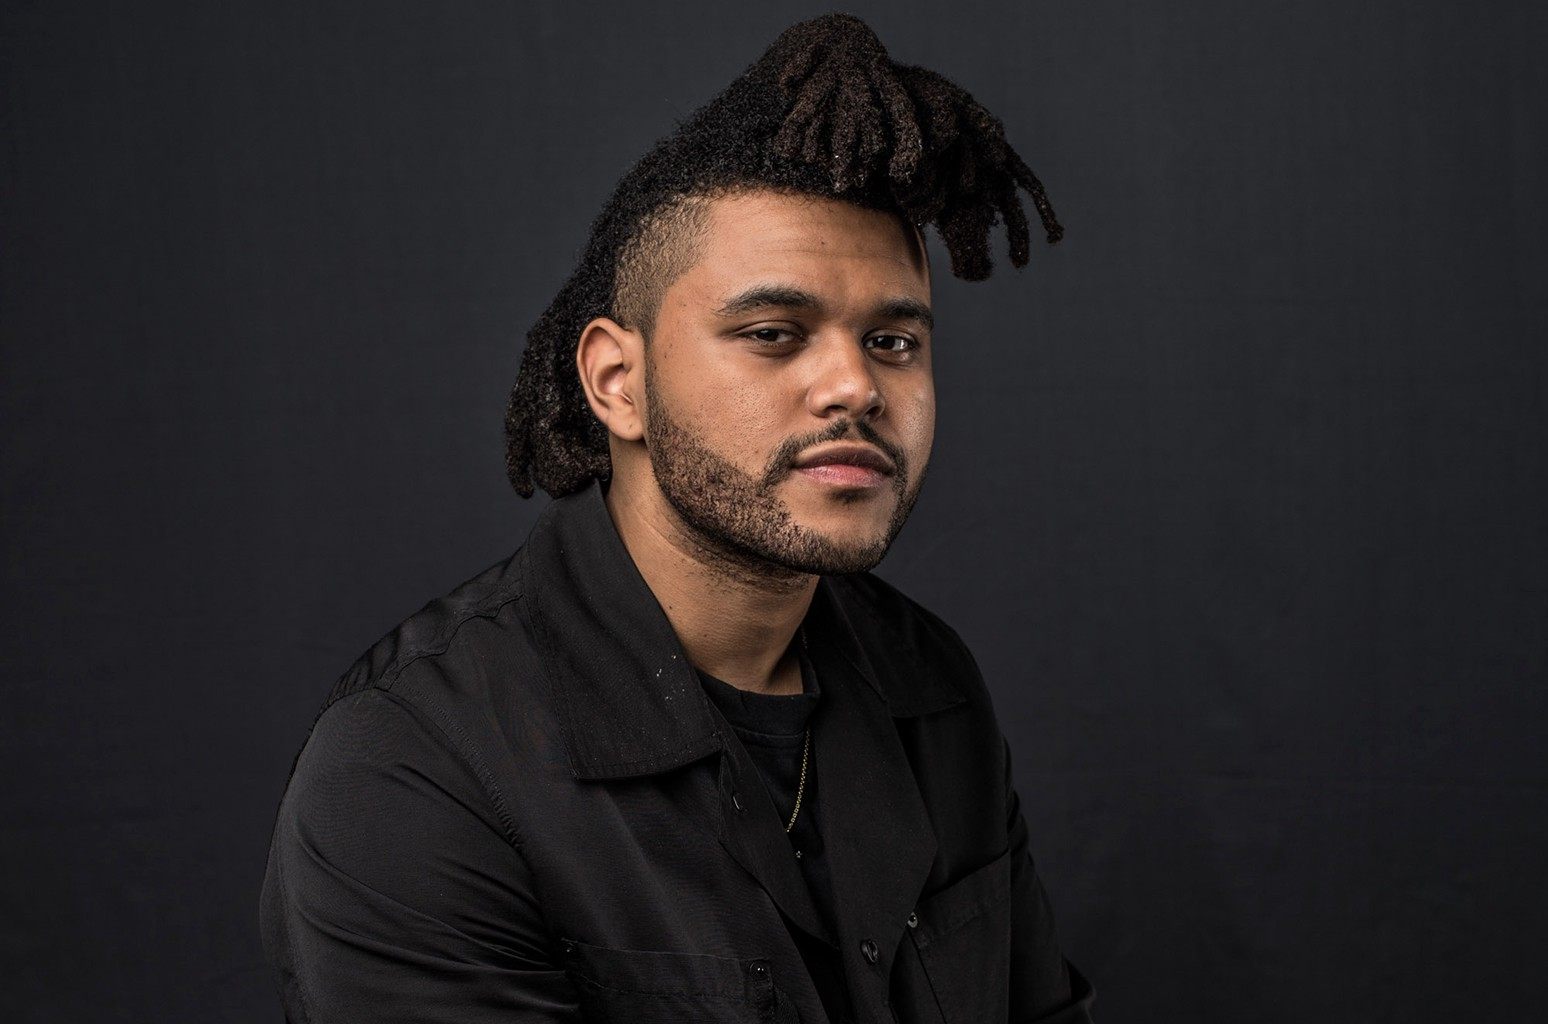 The Weeknd is boycotting the Grammys after receiving no nominations in 2021, despite the previously secret committees that coordinated voting being disbanded after public outcry over the awards’ perceived lack of representation. Photo: handout